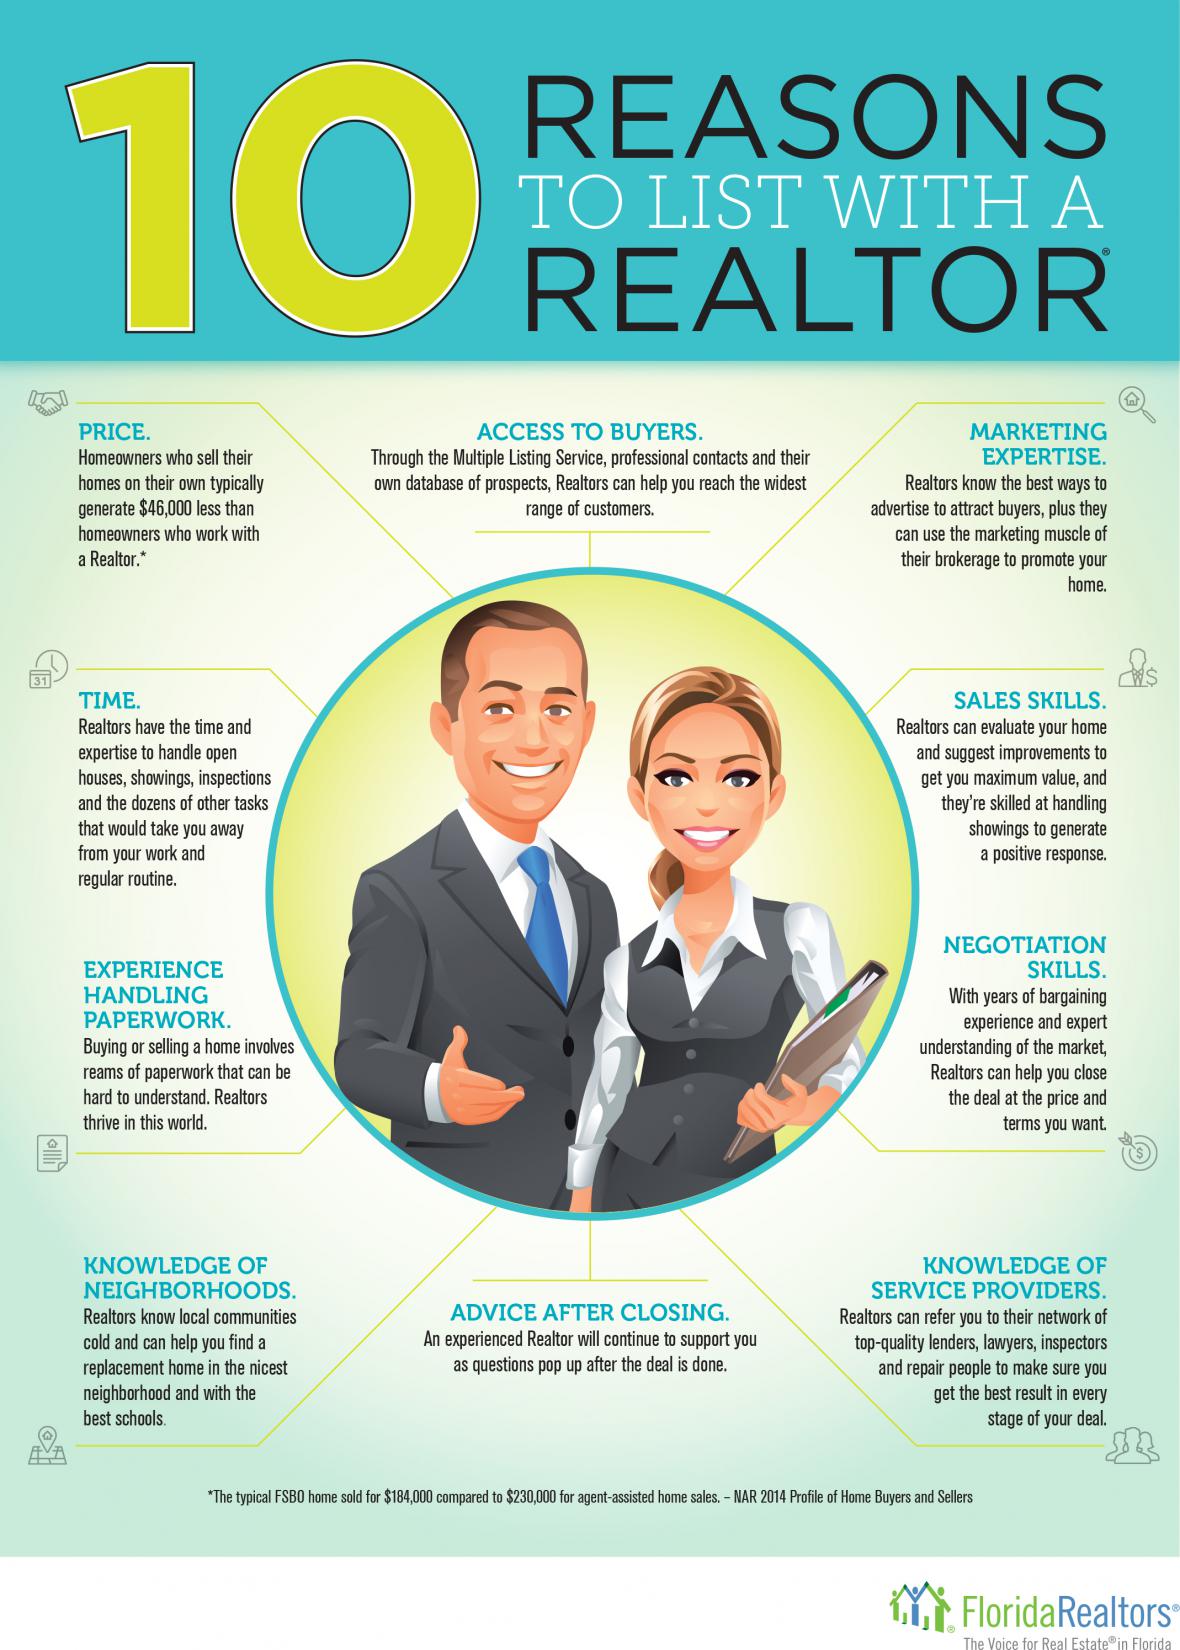 10 Reasons Why You Should List Your Home With a Realtor Jason Taub